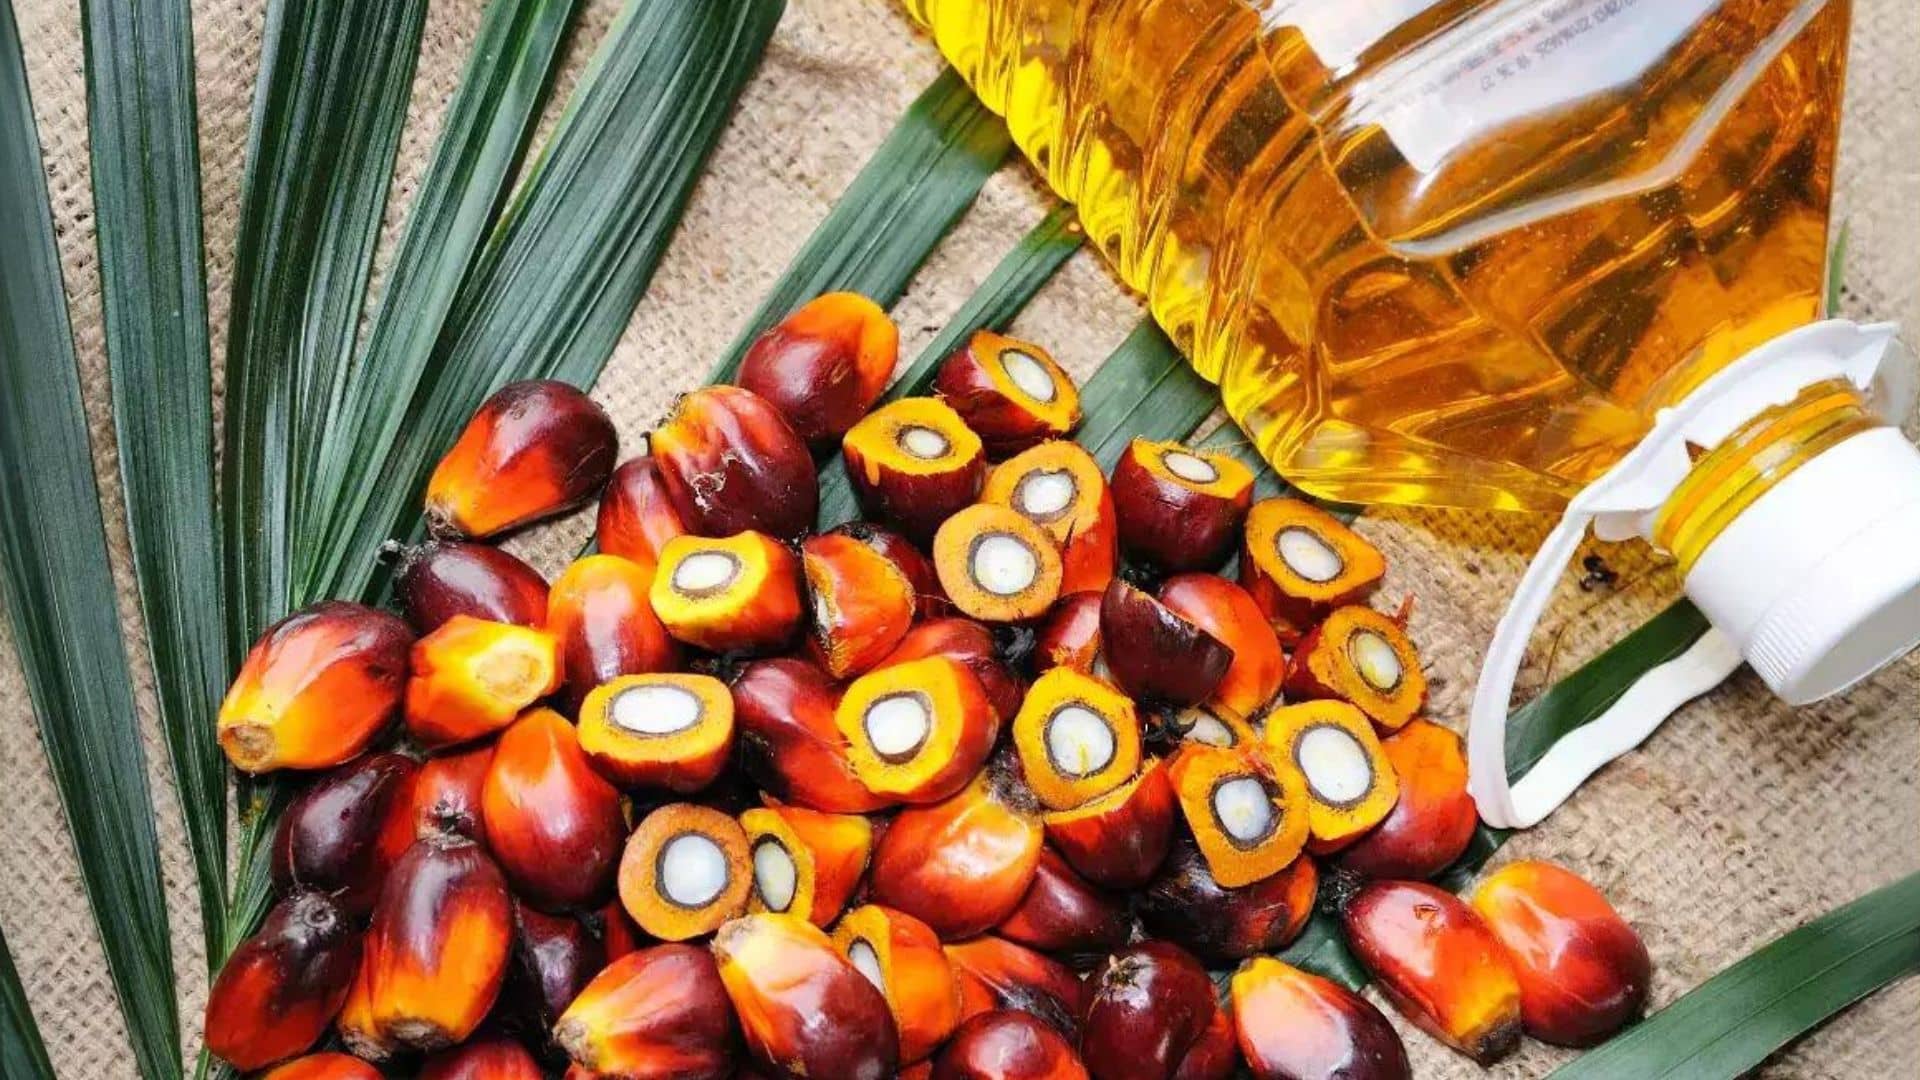 Health Effects of Palm Oil